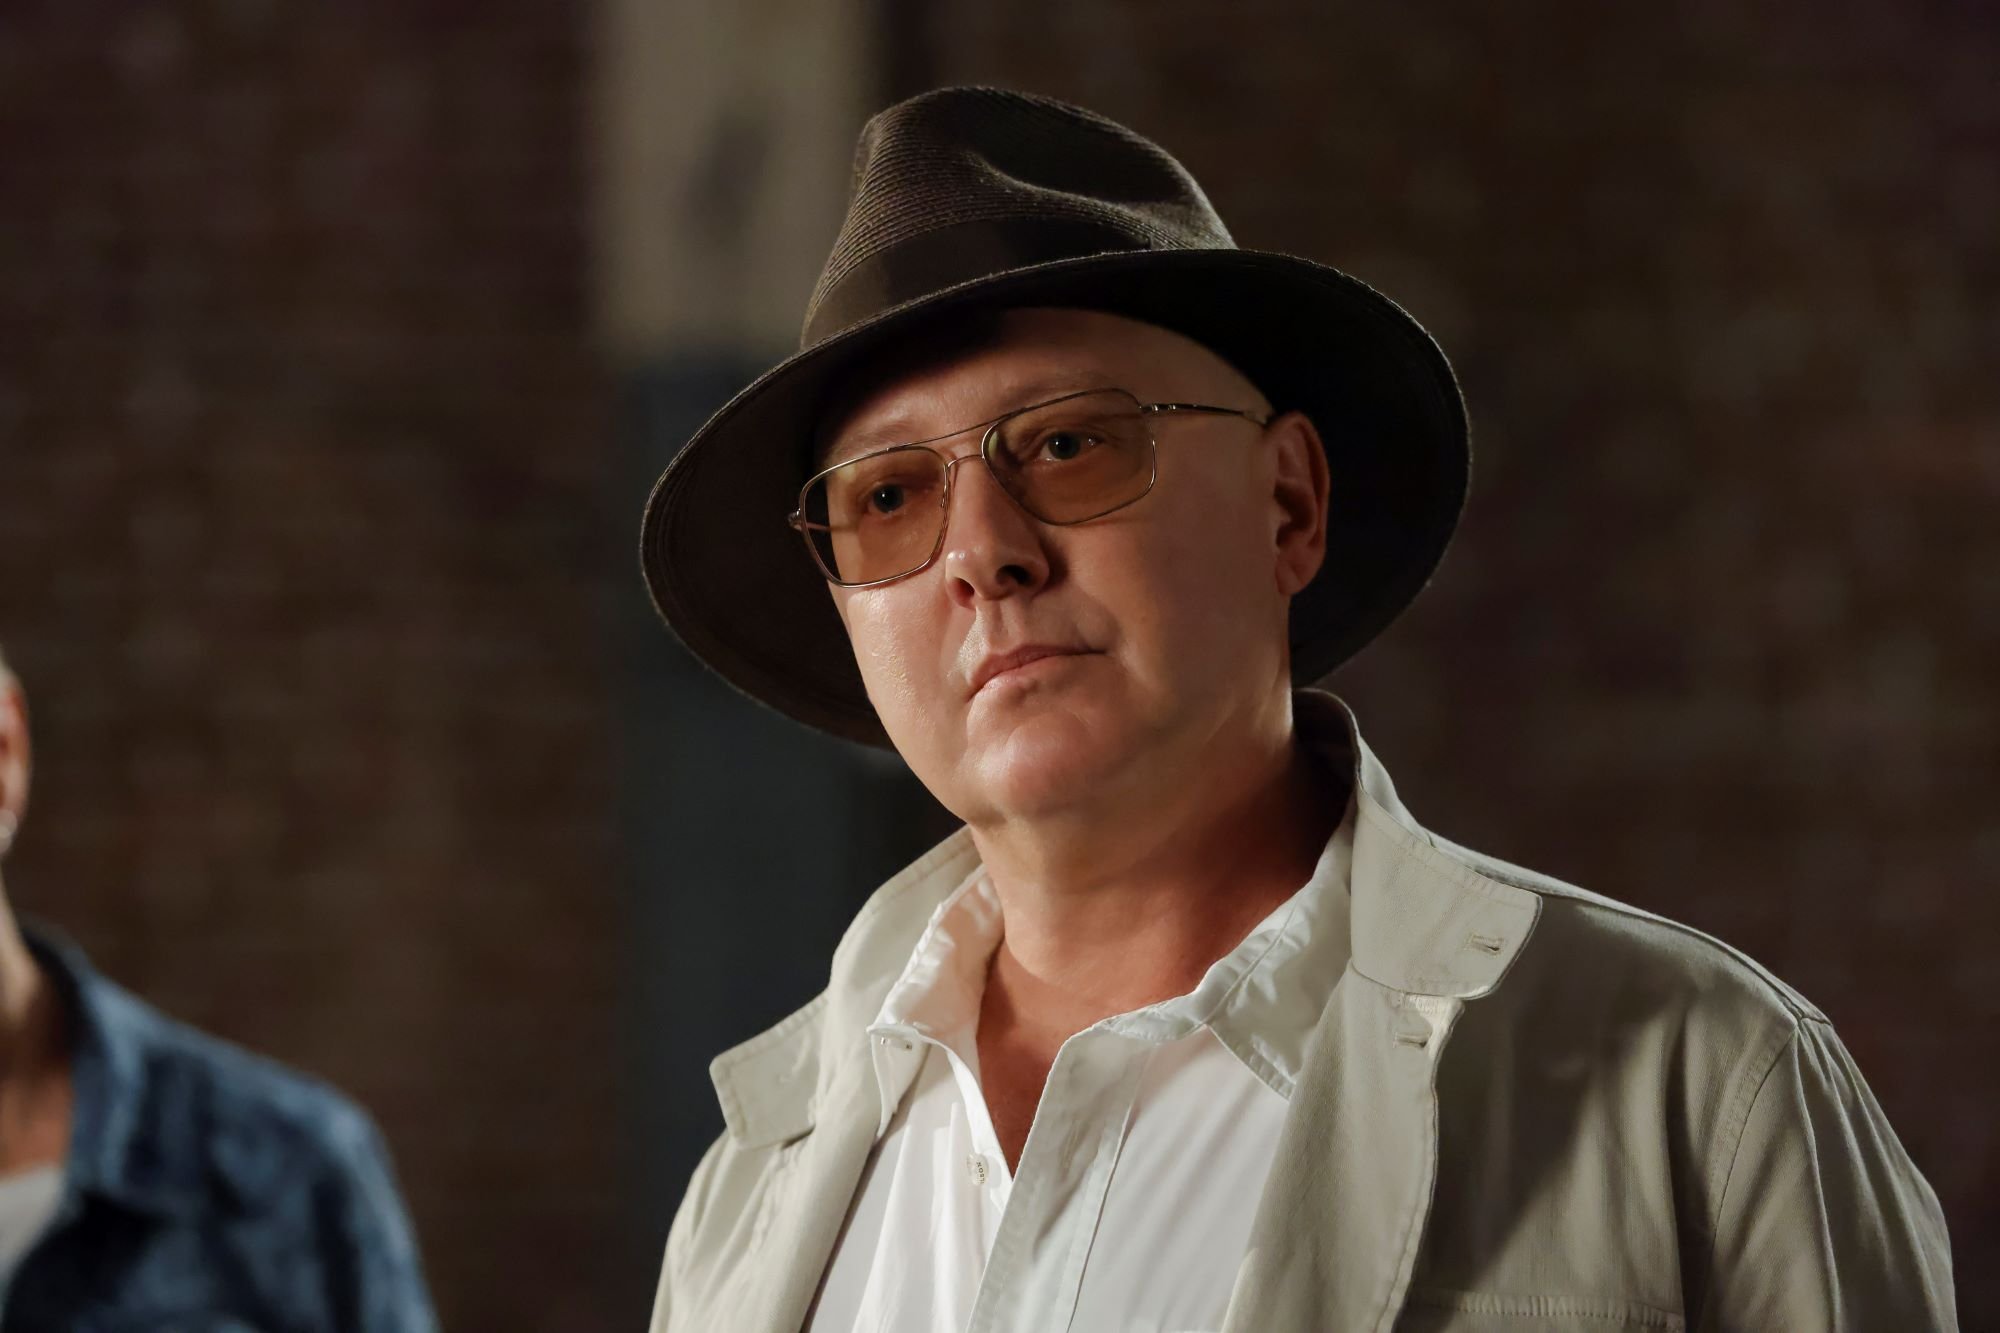 The Blacklist Actor James Spader Was Once Called The Strangest Man Alive By Rolling Stone